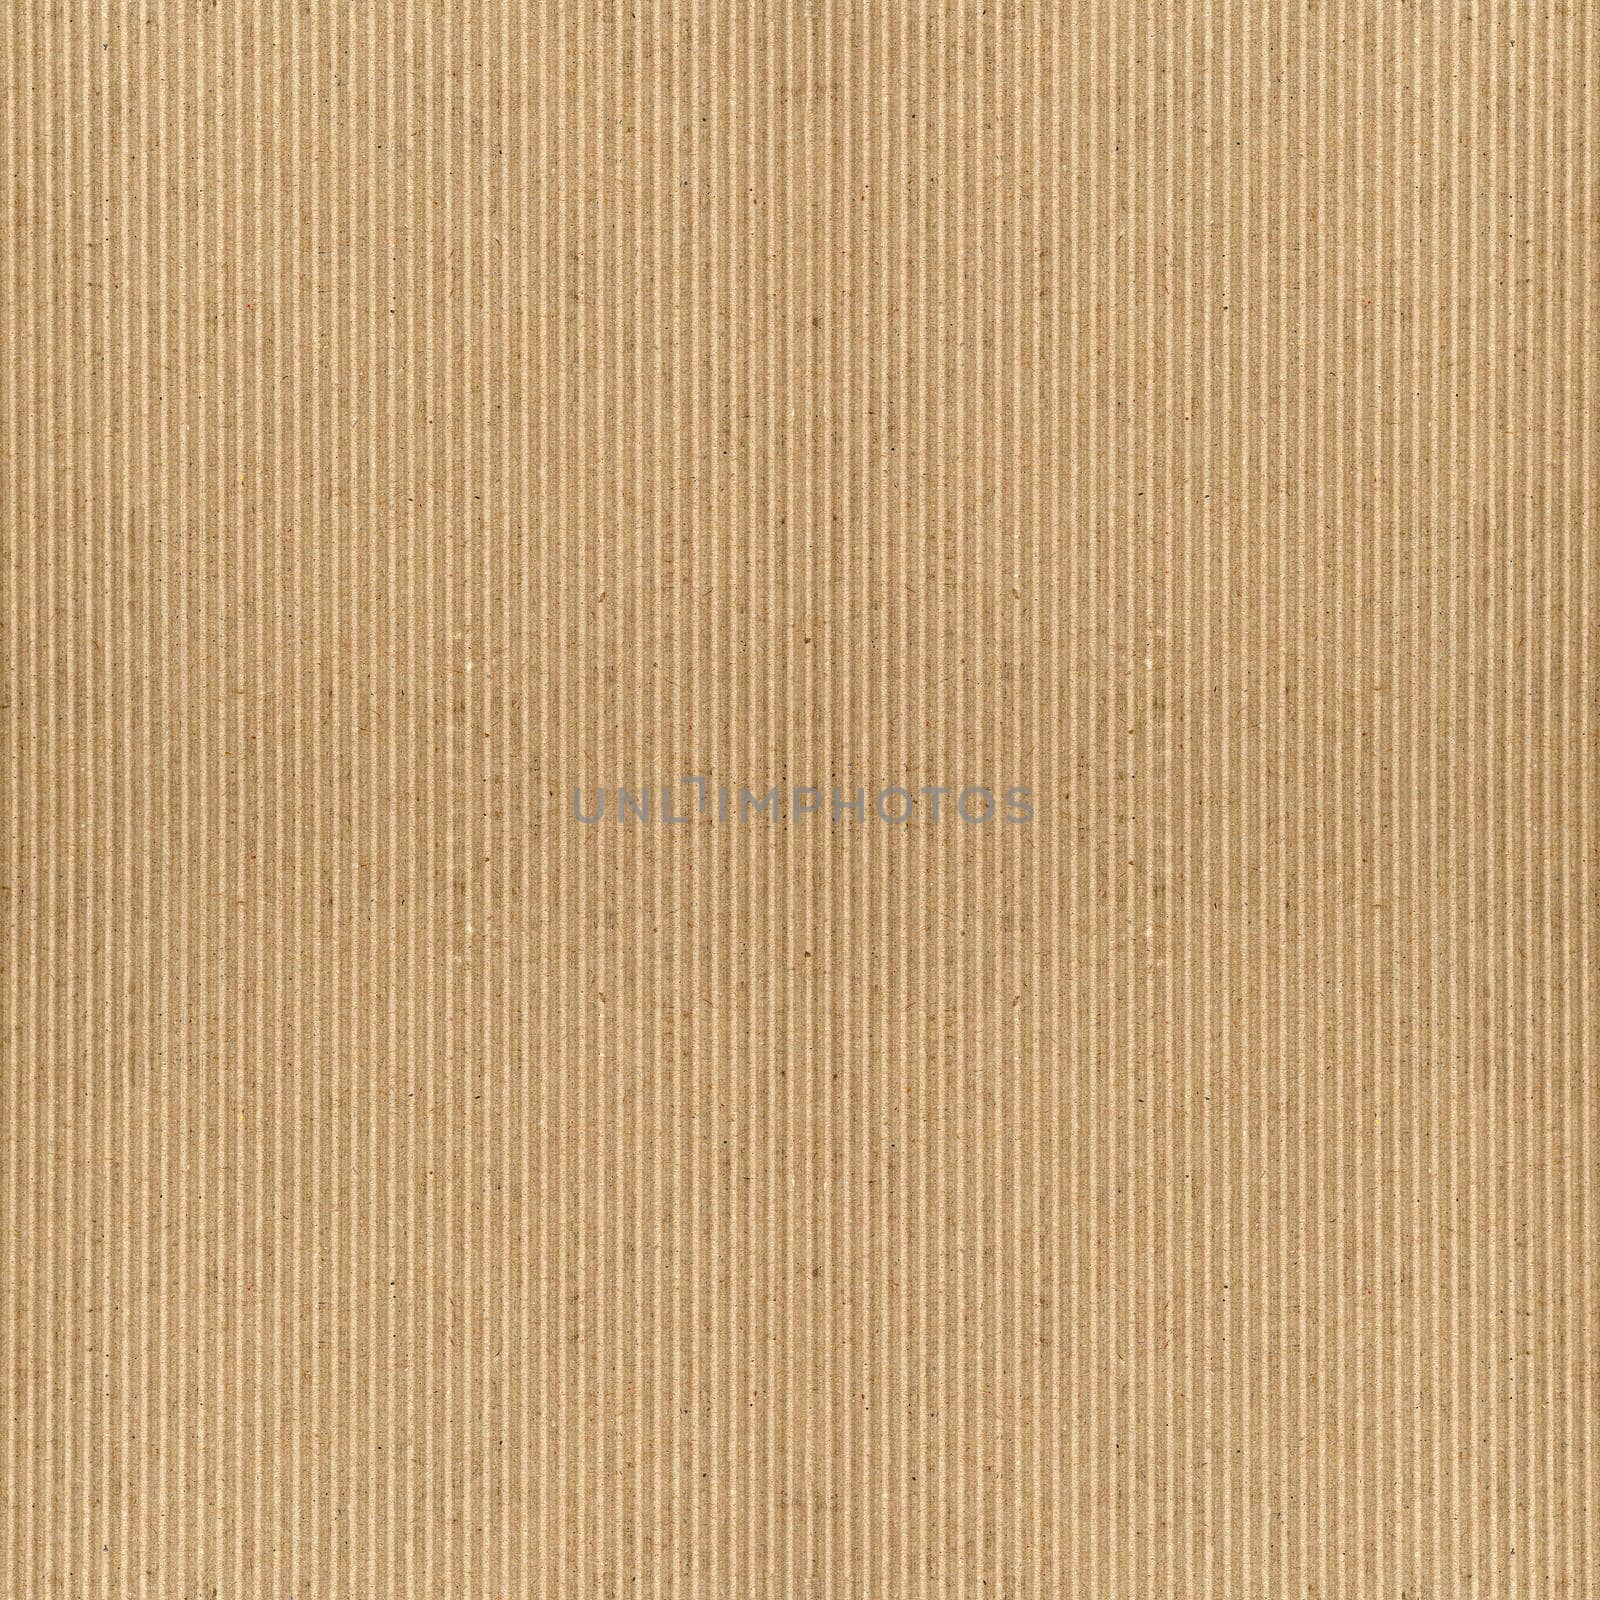 large brown corrugated cardboard texture useful as a background